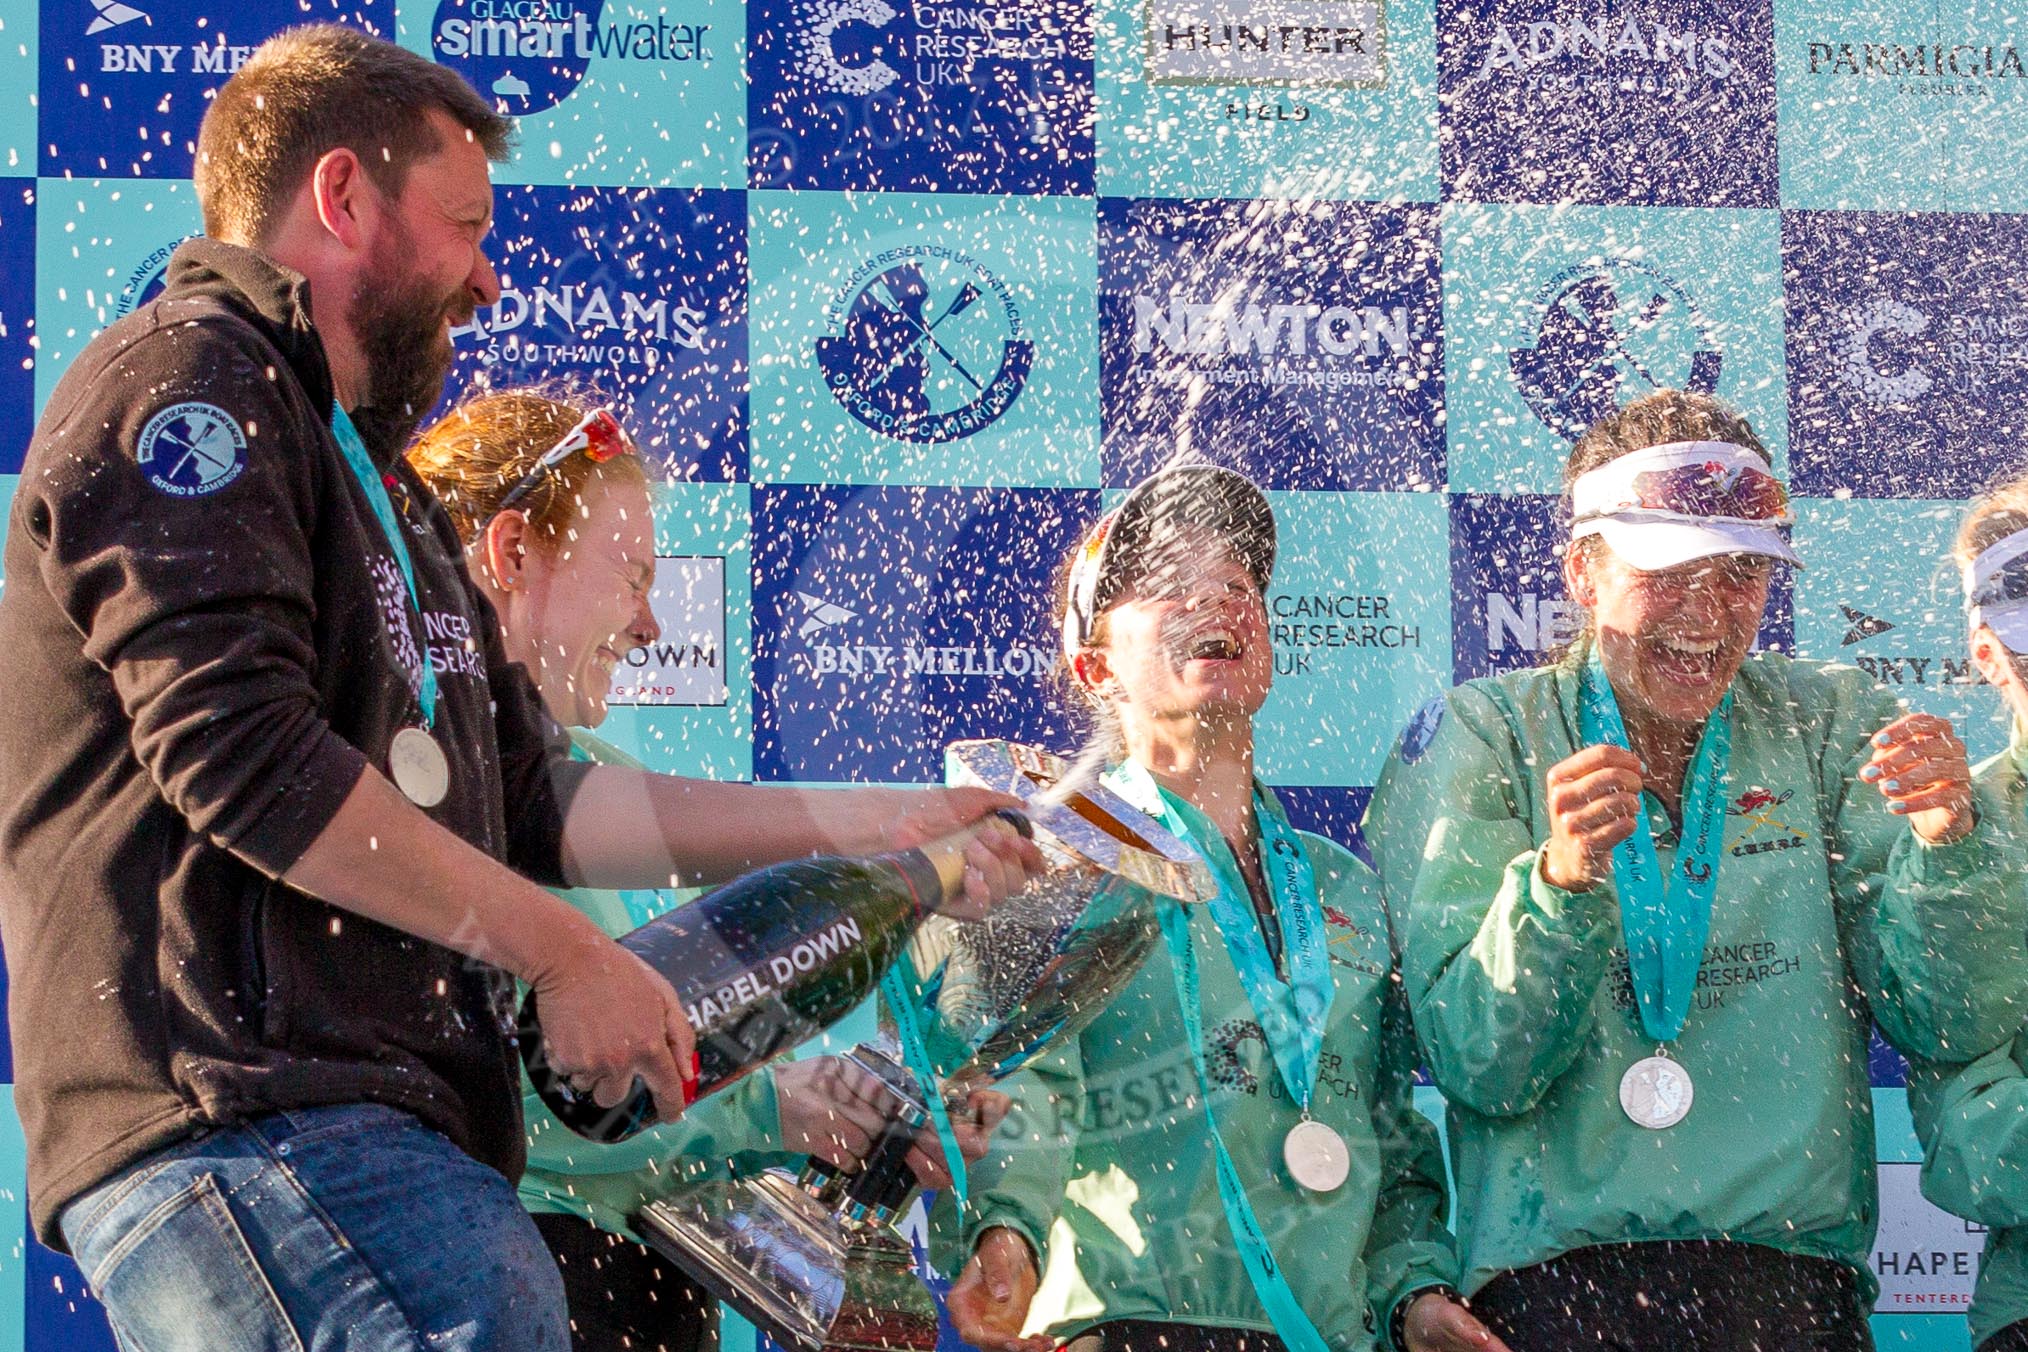 The Boat Race season 2017 -  The Cancer Research Women's Boat Race: CUWBC head coach Rob Barker spraying Champagne at the crew - here bow Ashton Brown, 2 Imogen Grant, and 3 Claire Lambe.
River Thames between Putney Bridge and Mortlake,
London SW15,

United Kingdom,
on 02 April 2017 at 17:13, image #271